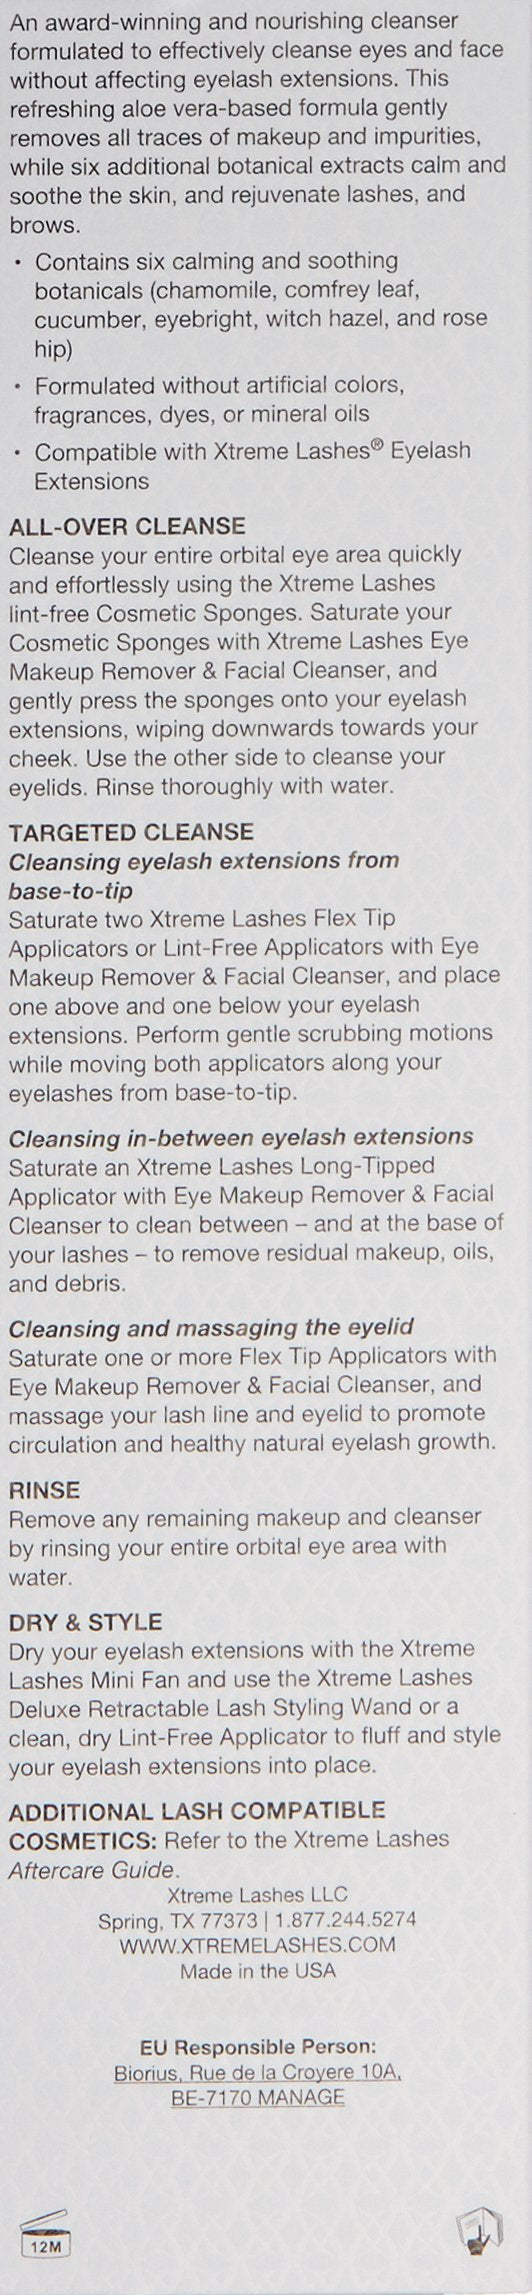 [Australia] - Xtreme Lashes Makeup Remover and Facial Cleanser 120mL 